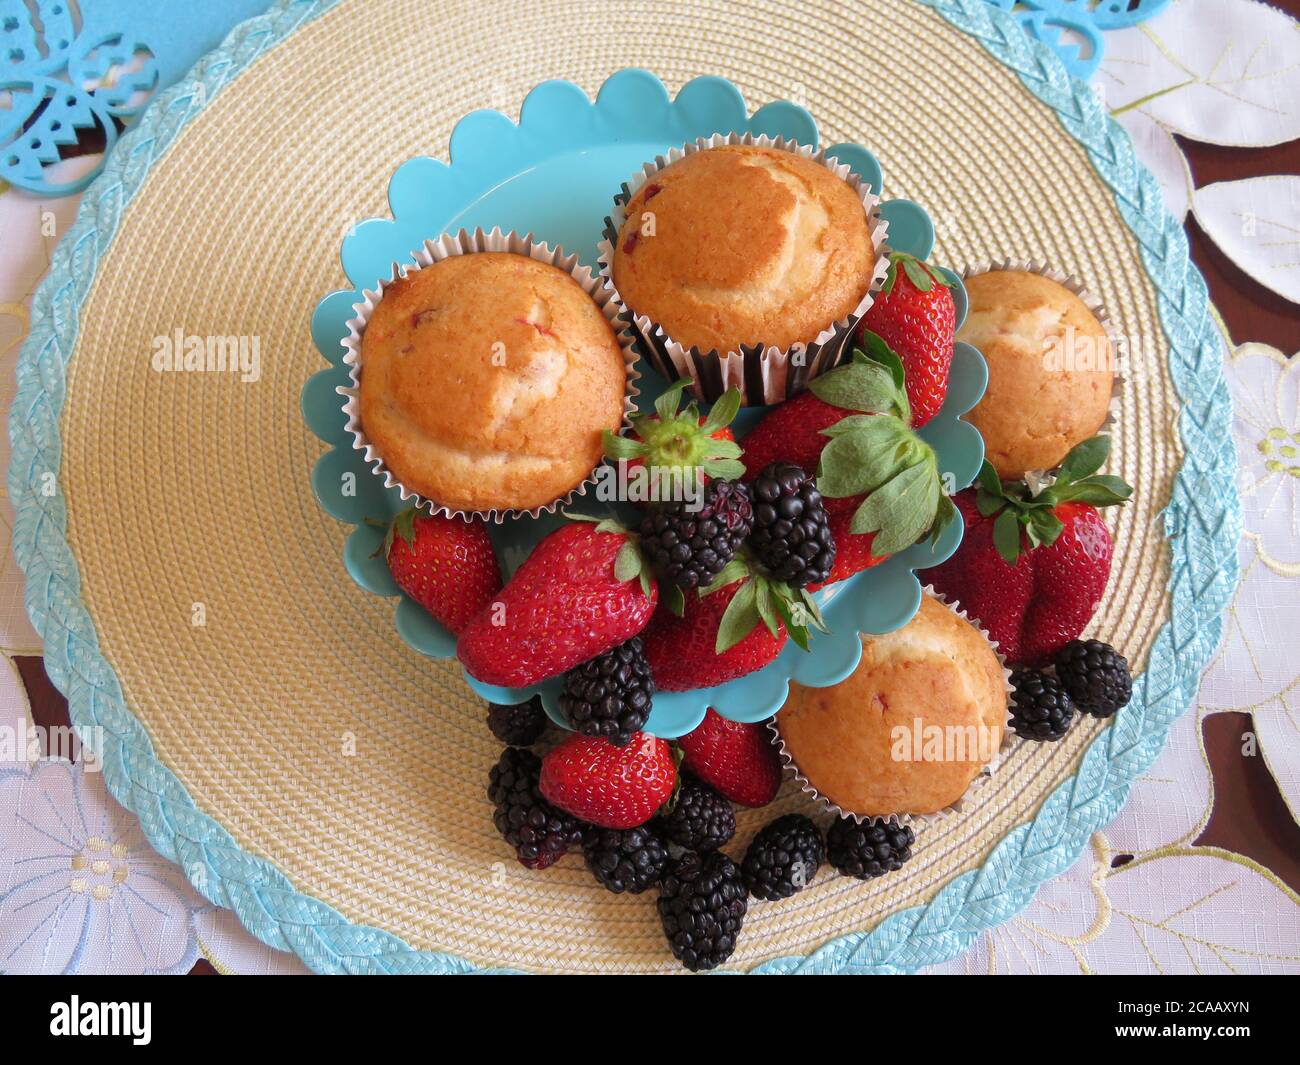 Fresh baked muffins with blueberries and strawberries Stock Photo